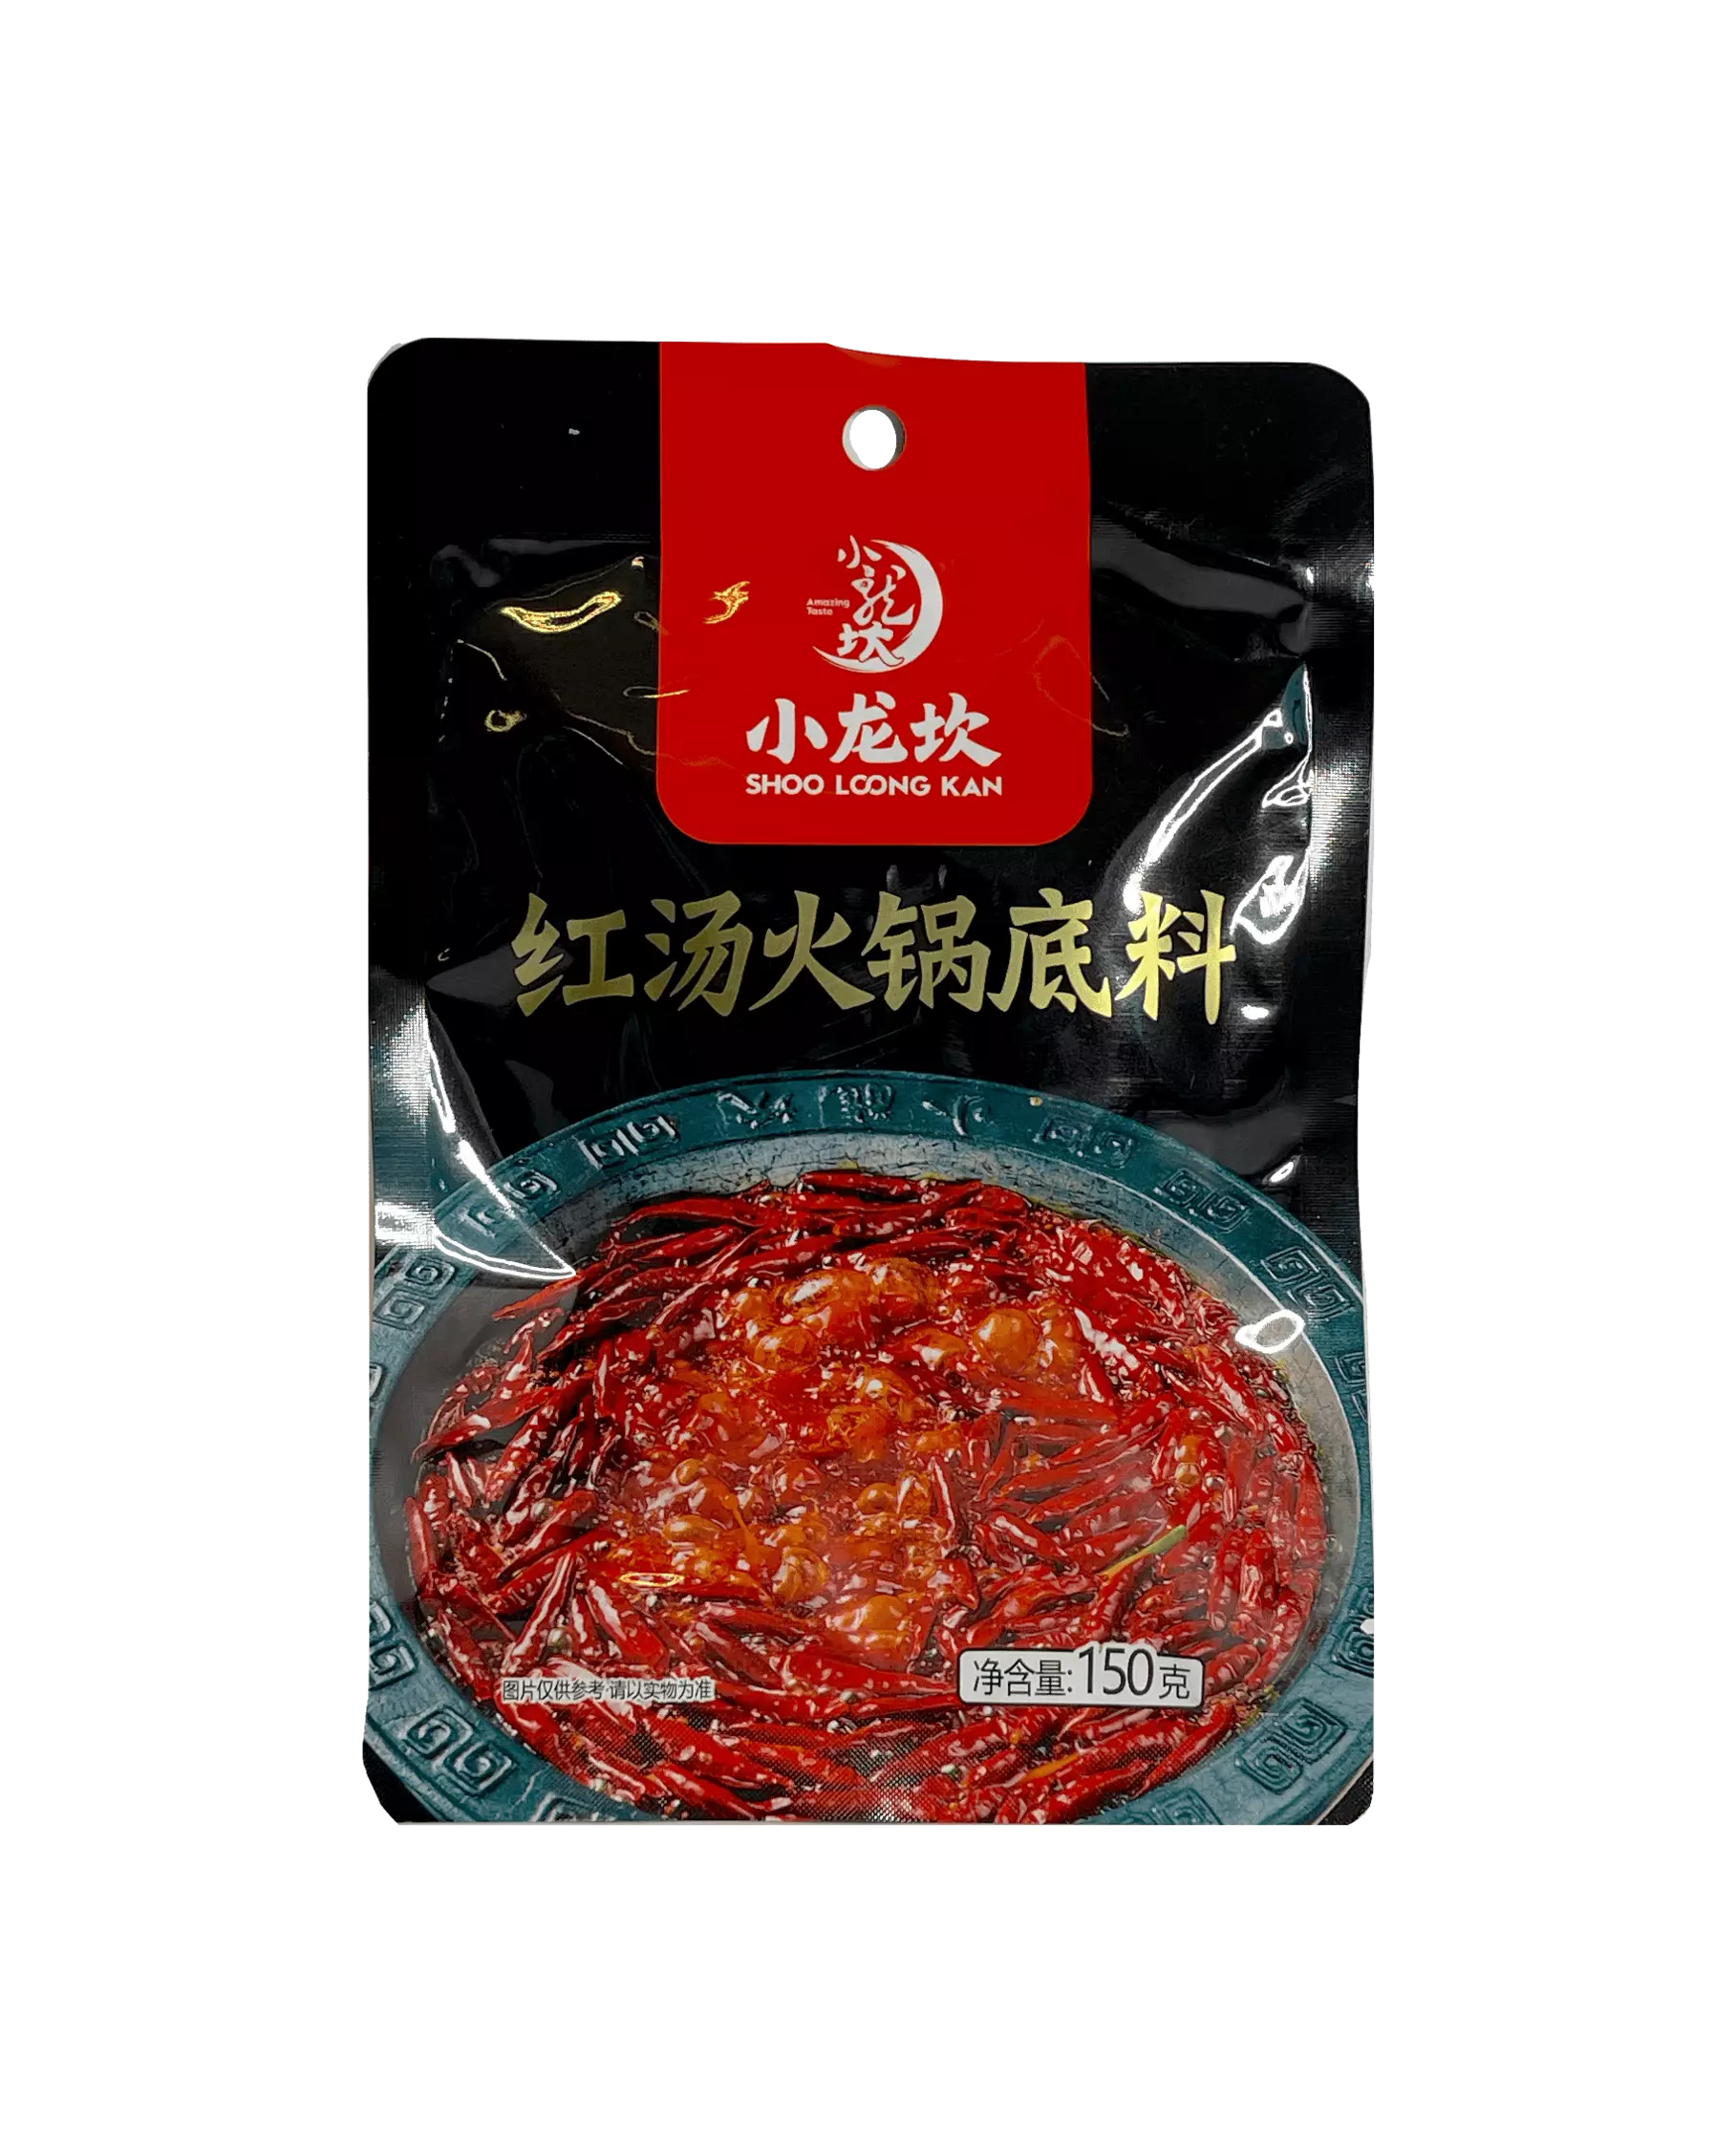 Hot Pot Broth in Chili Red Soup 150g Xiao Long Kan China